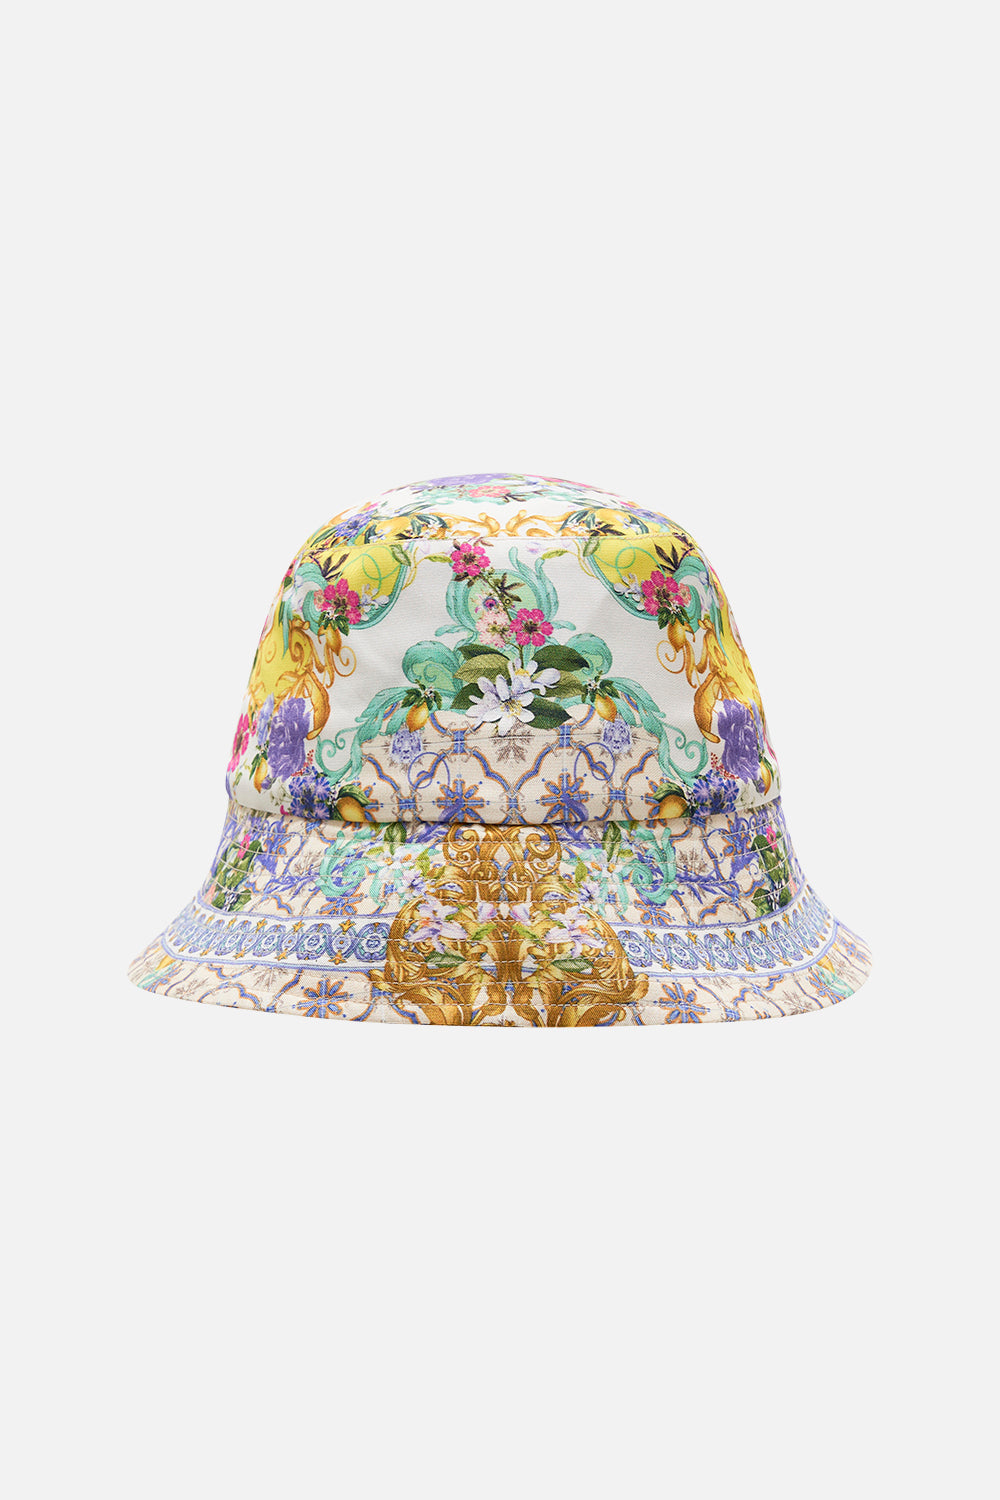 Product view of CAMILLA bucket hat in Caterina Spritz print